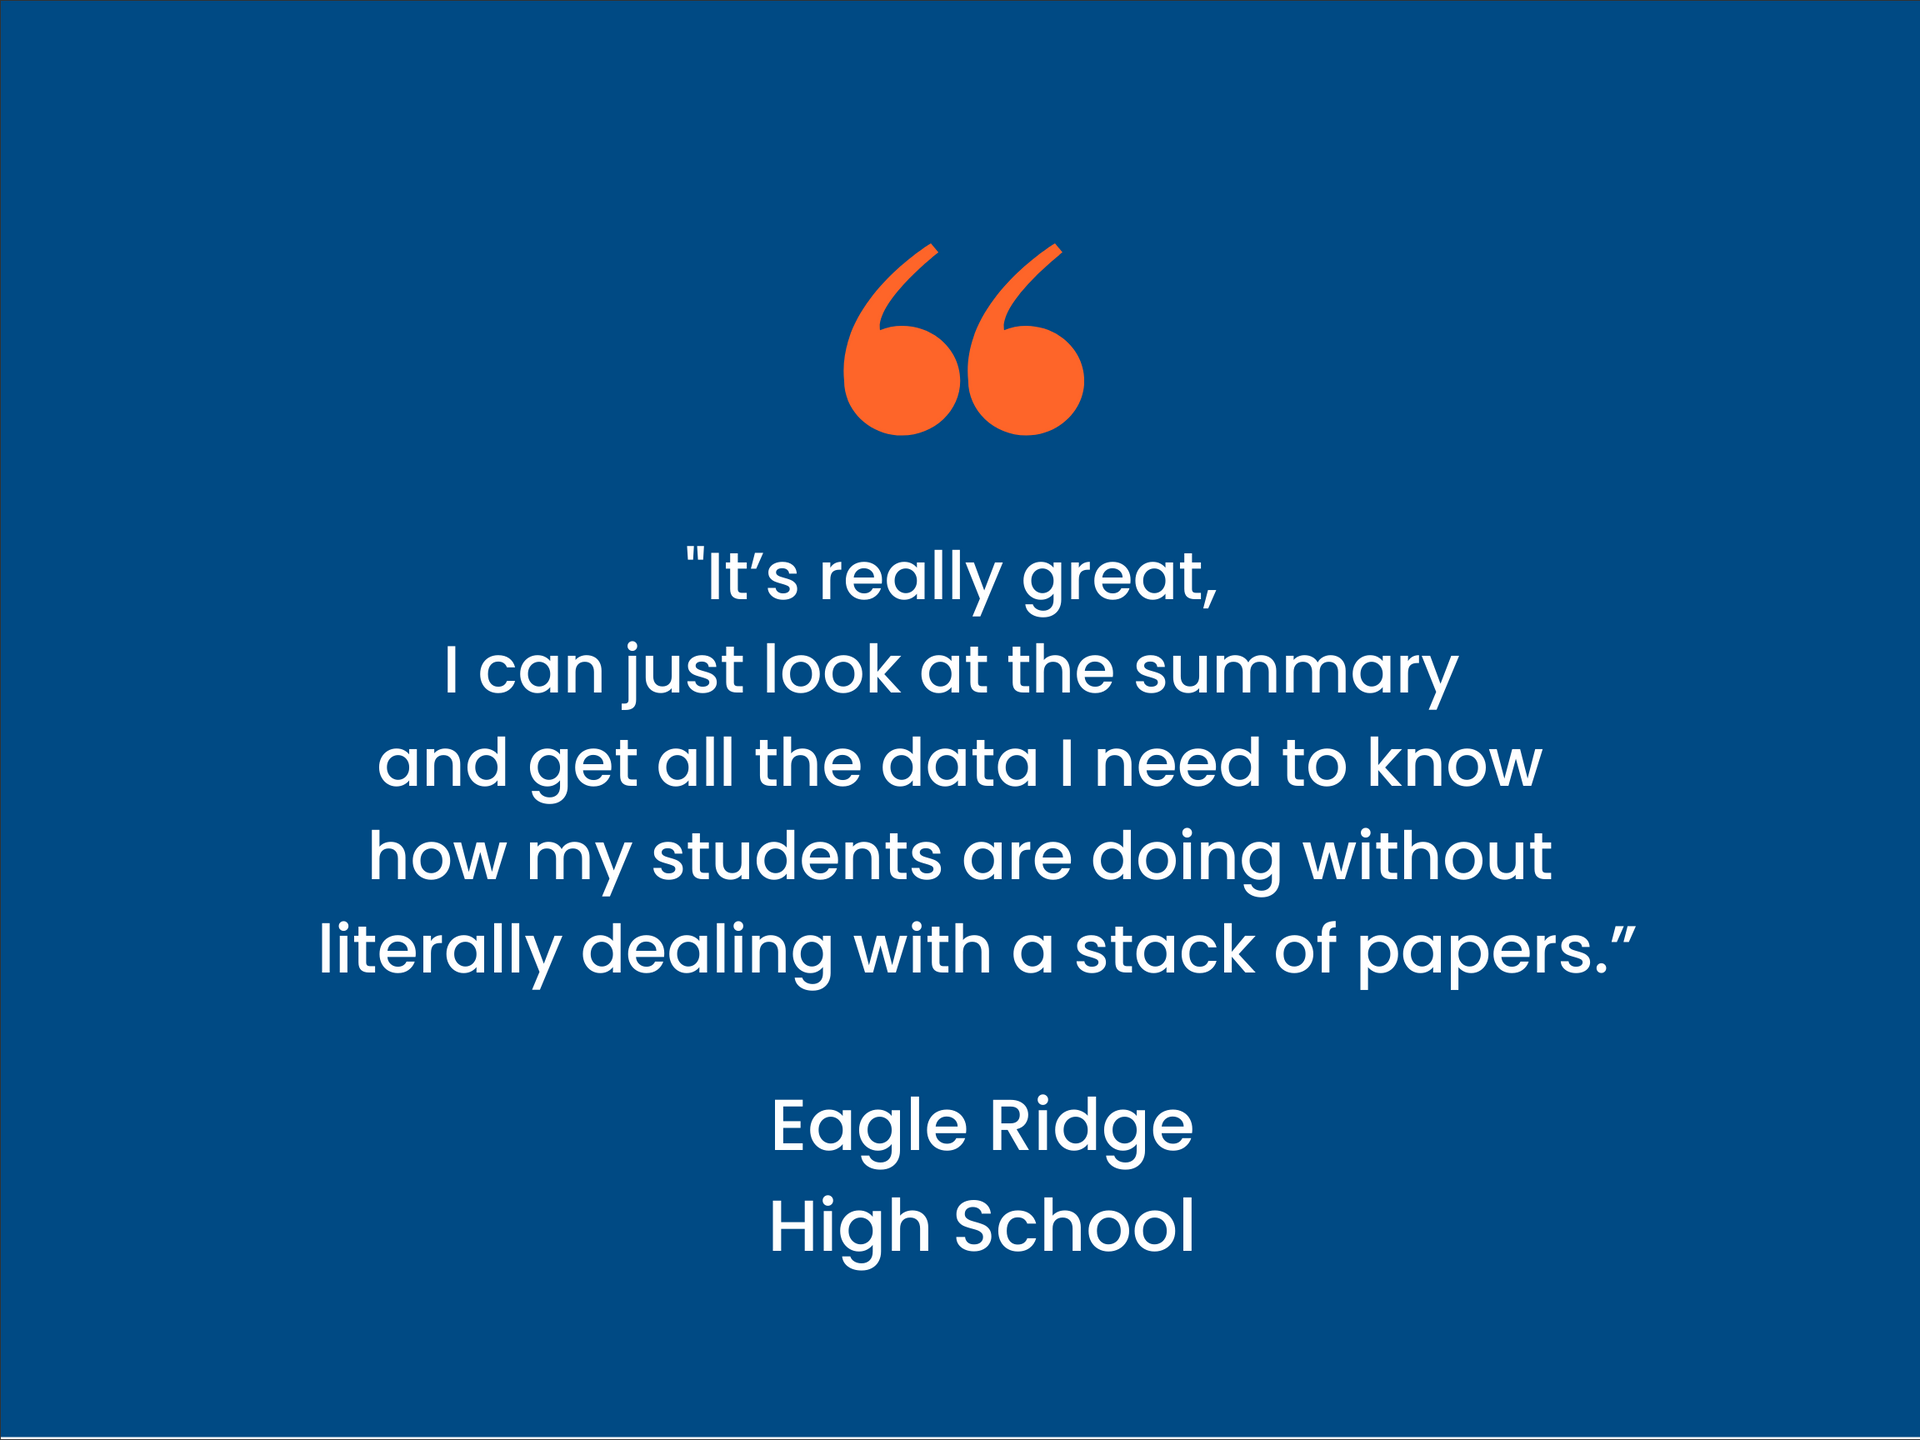 Quote card - Eagle Ridge high School says "It's really great, I can just look at the summary and get all the data I need to know how my students are doing without literally dealing with a stack of papers."